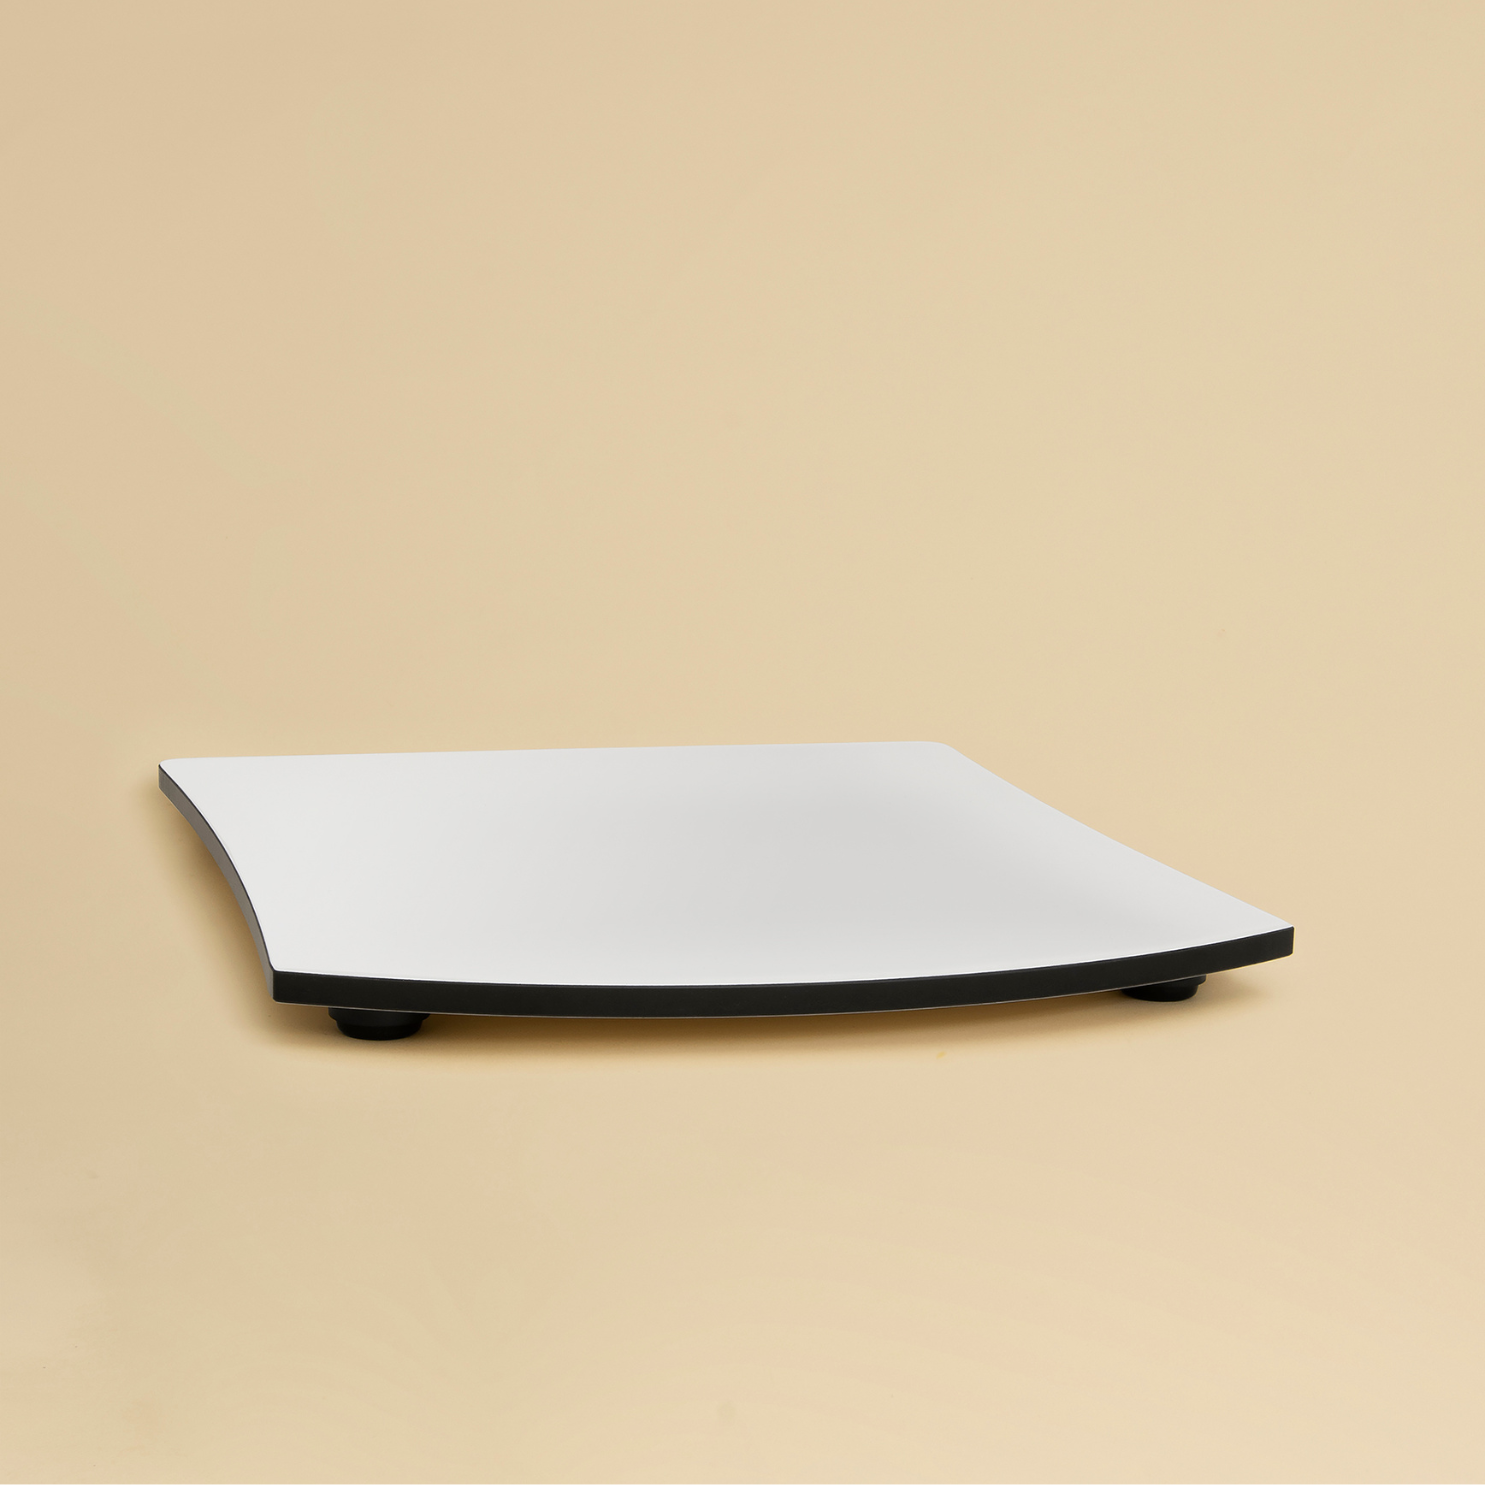 Sliding board suitable for the Thermomix TM5 made of HPL in pearl white